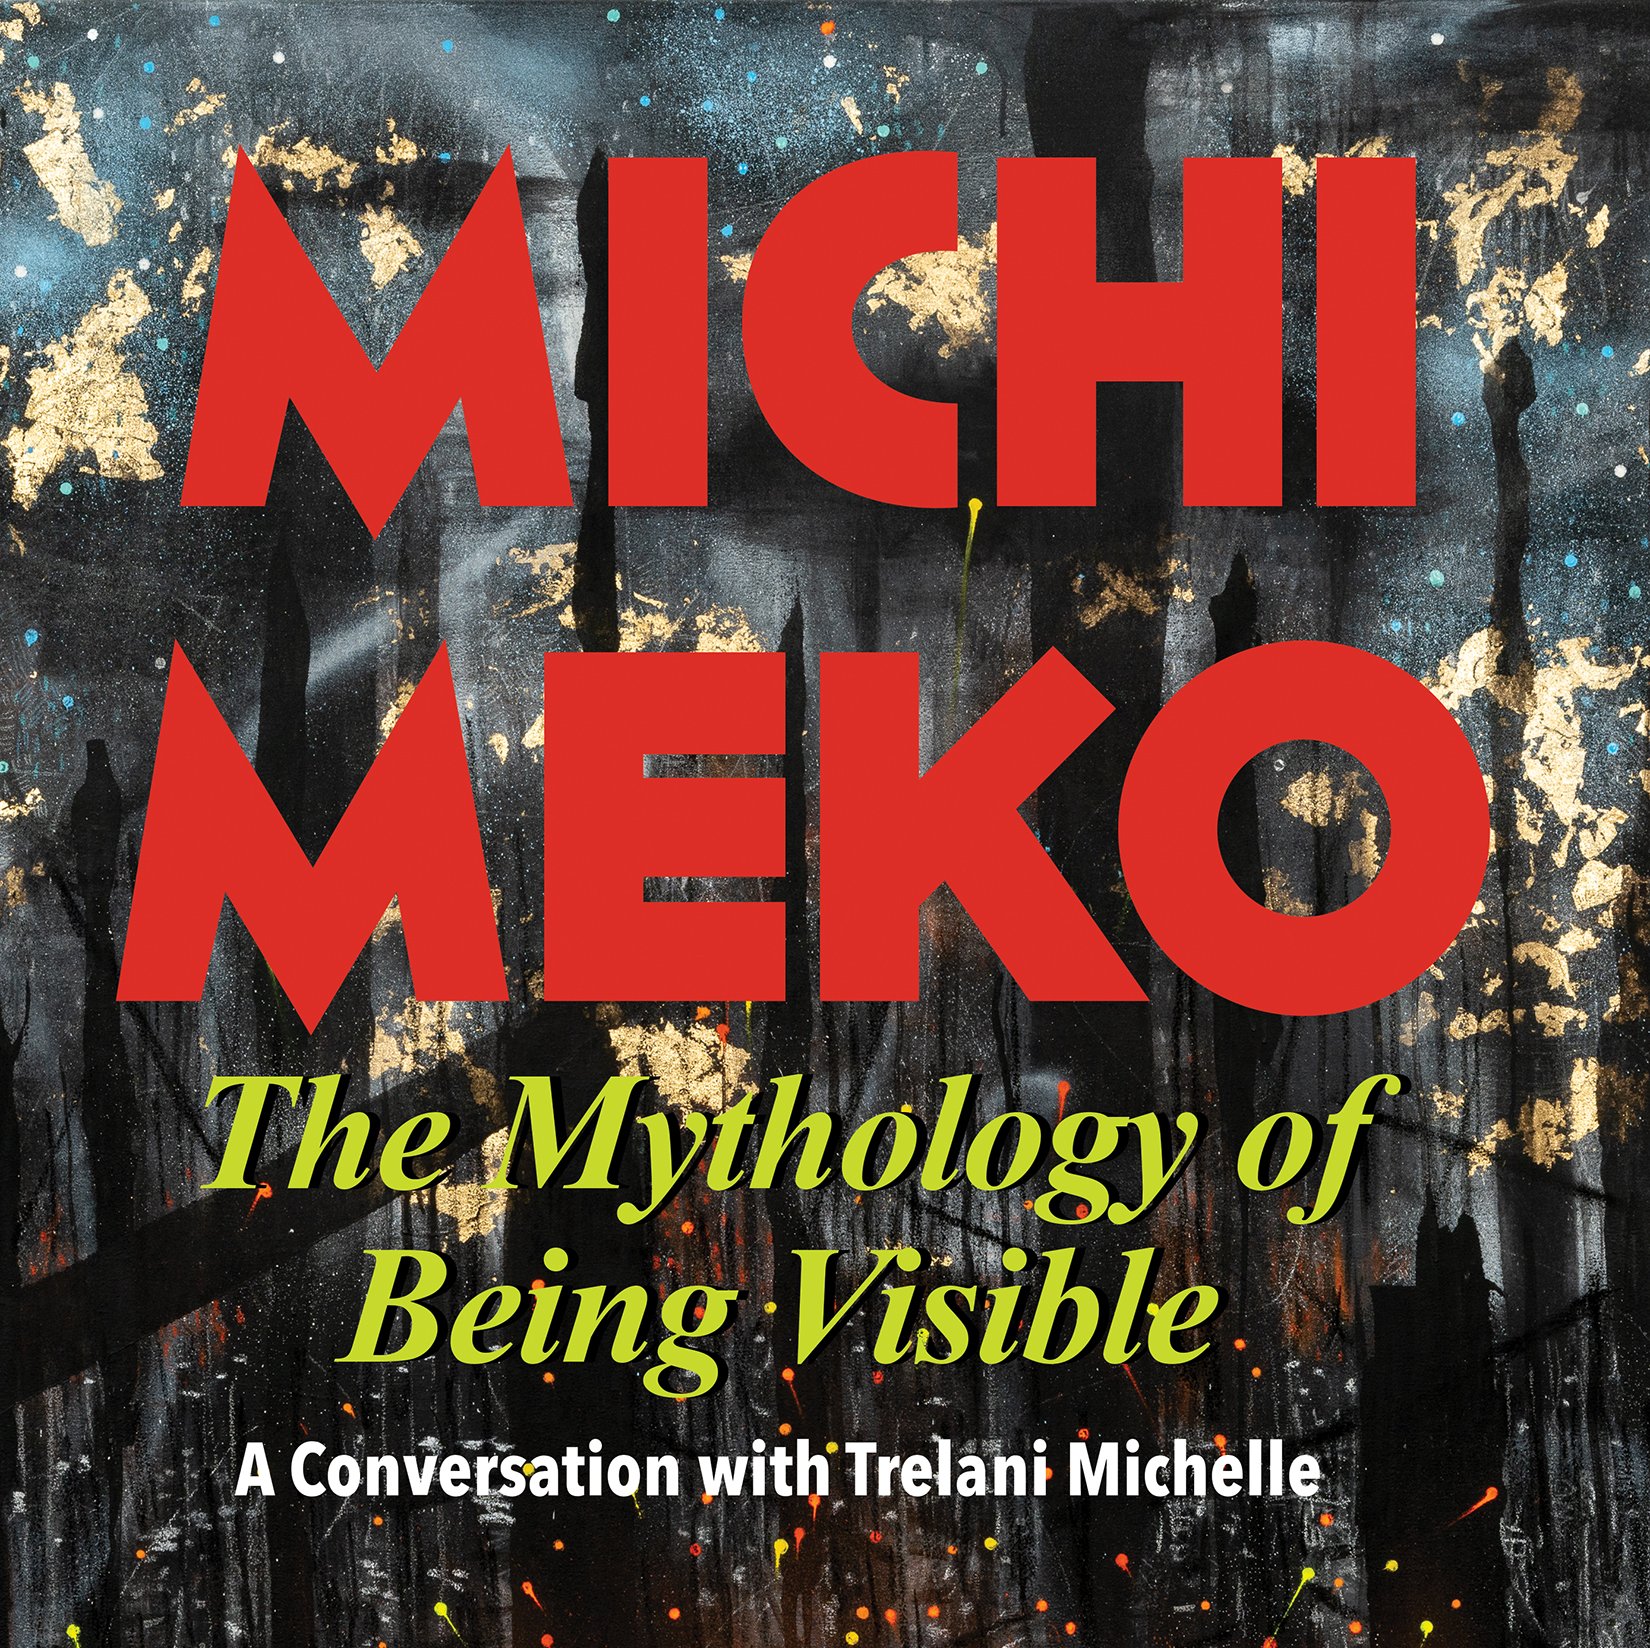 Michi Meko: The Mythology of Being Visible A Conversation with Trelani Michelle